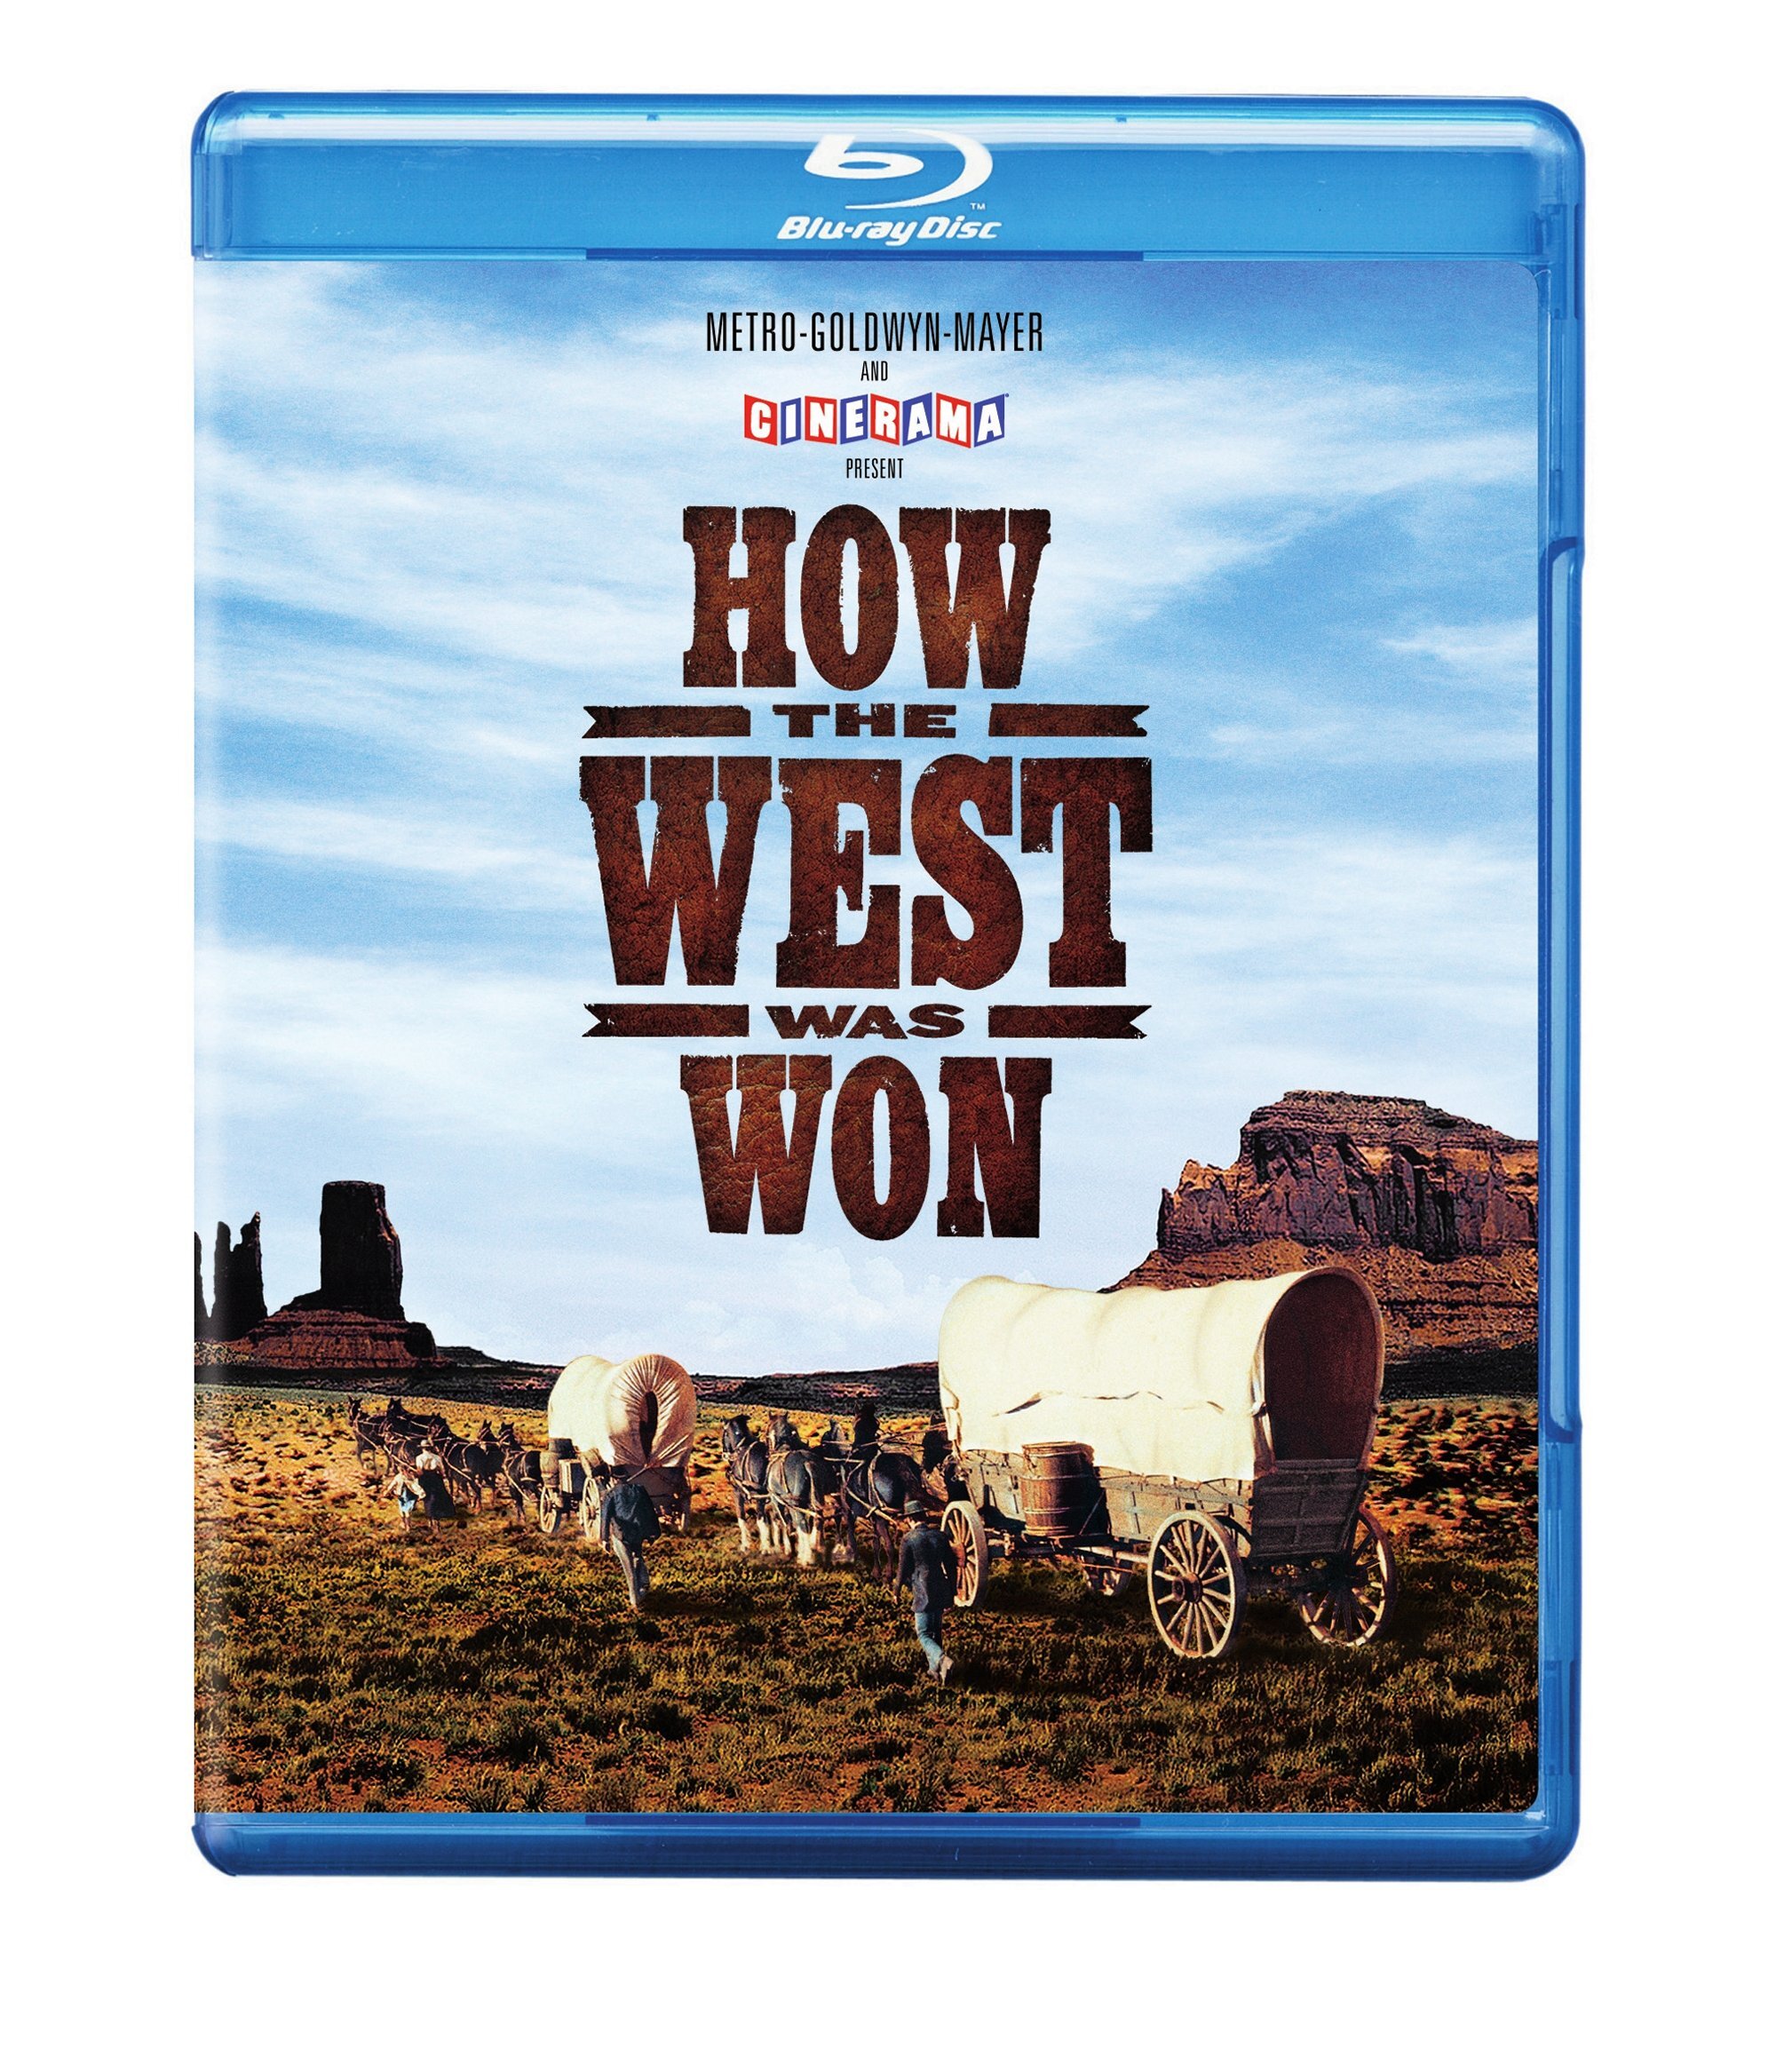 How The West Was Won (Blu-ray Special Edition) - Blu-ray [ 1962 ]  - Western Movies On Blu-ray - Movies On GRUV